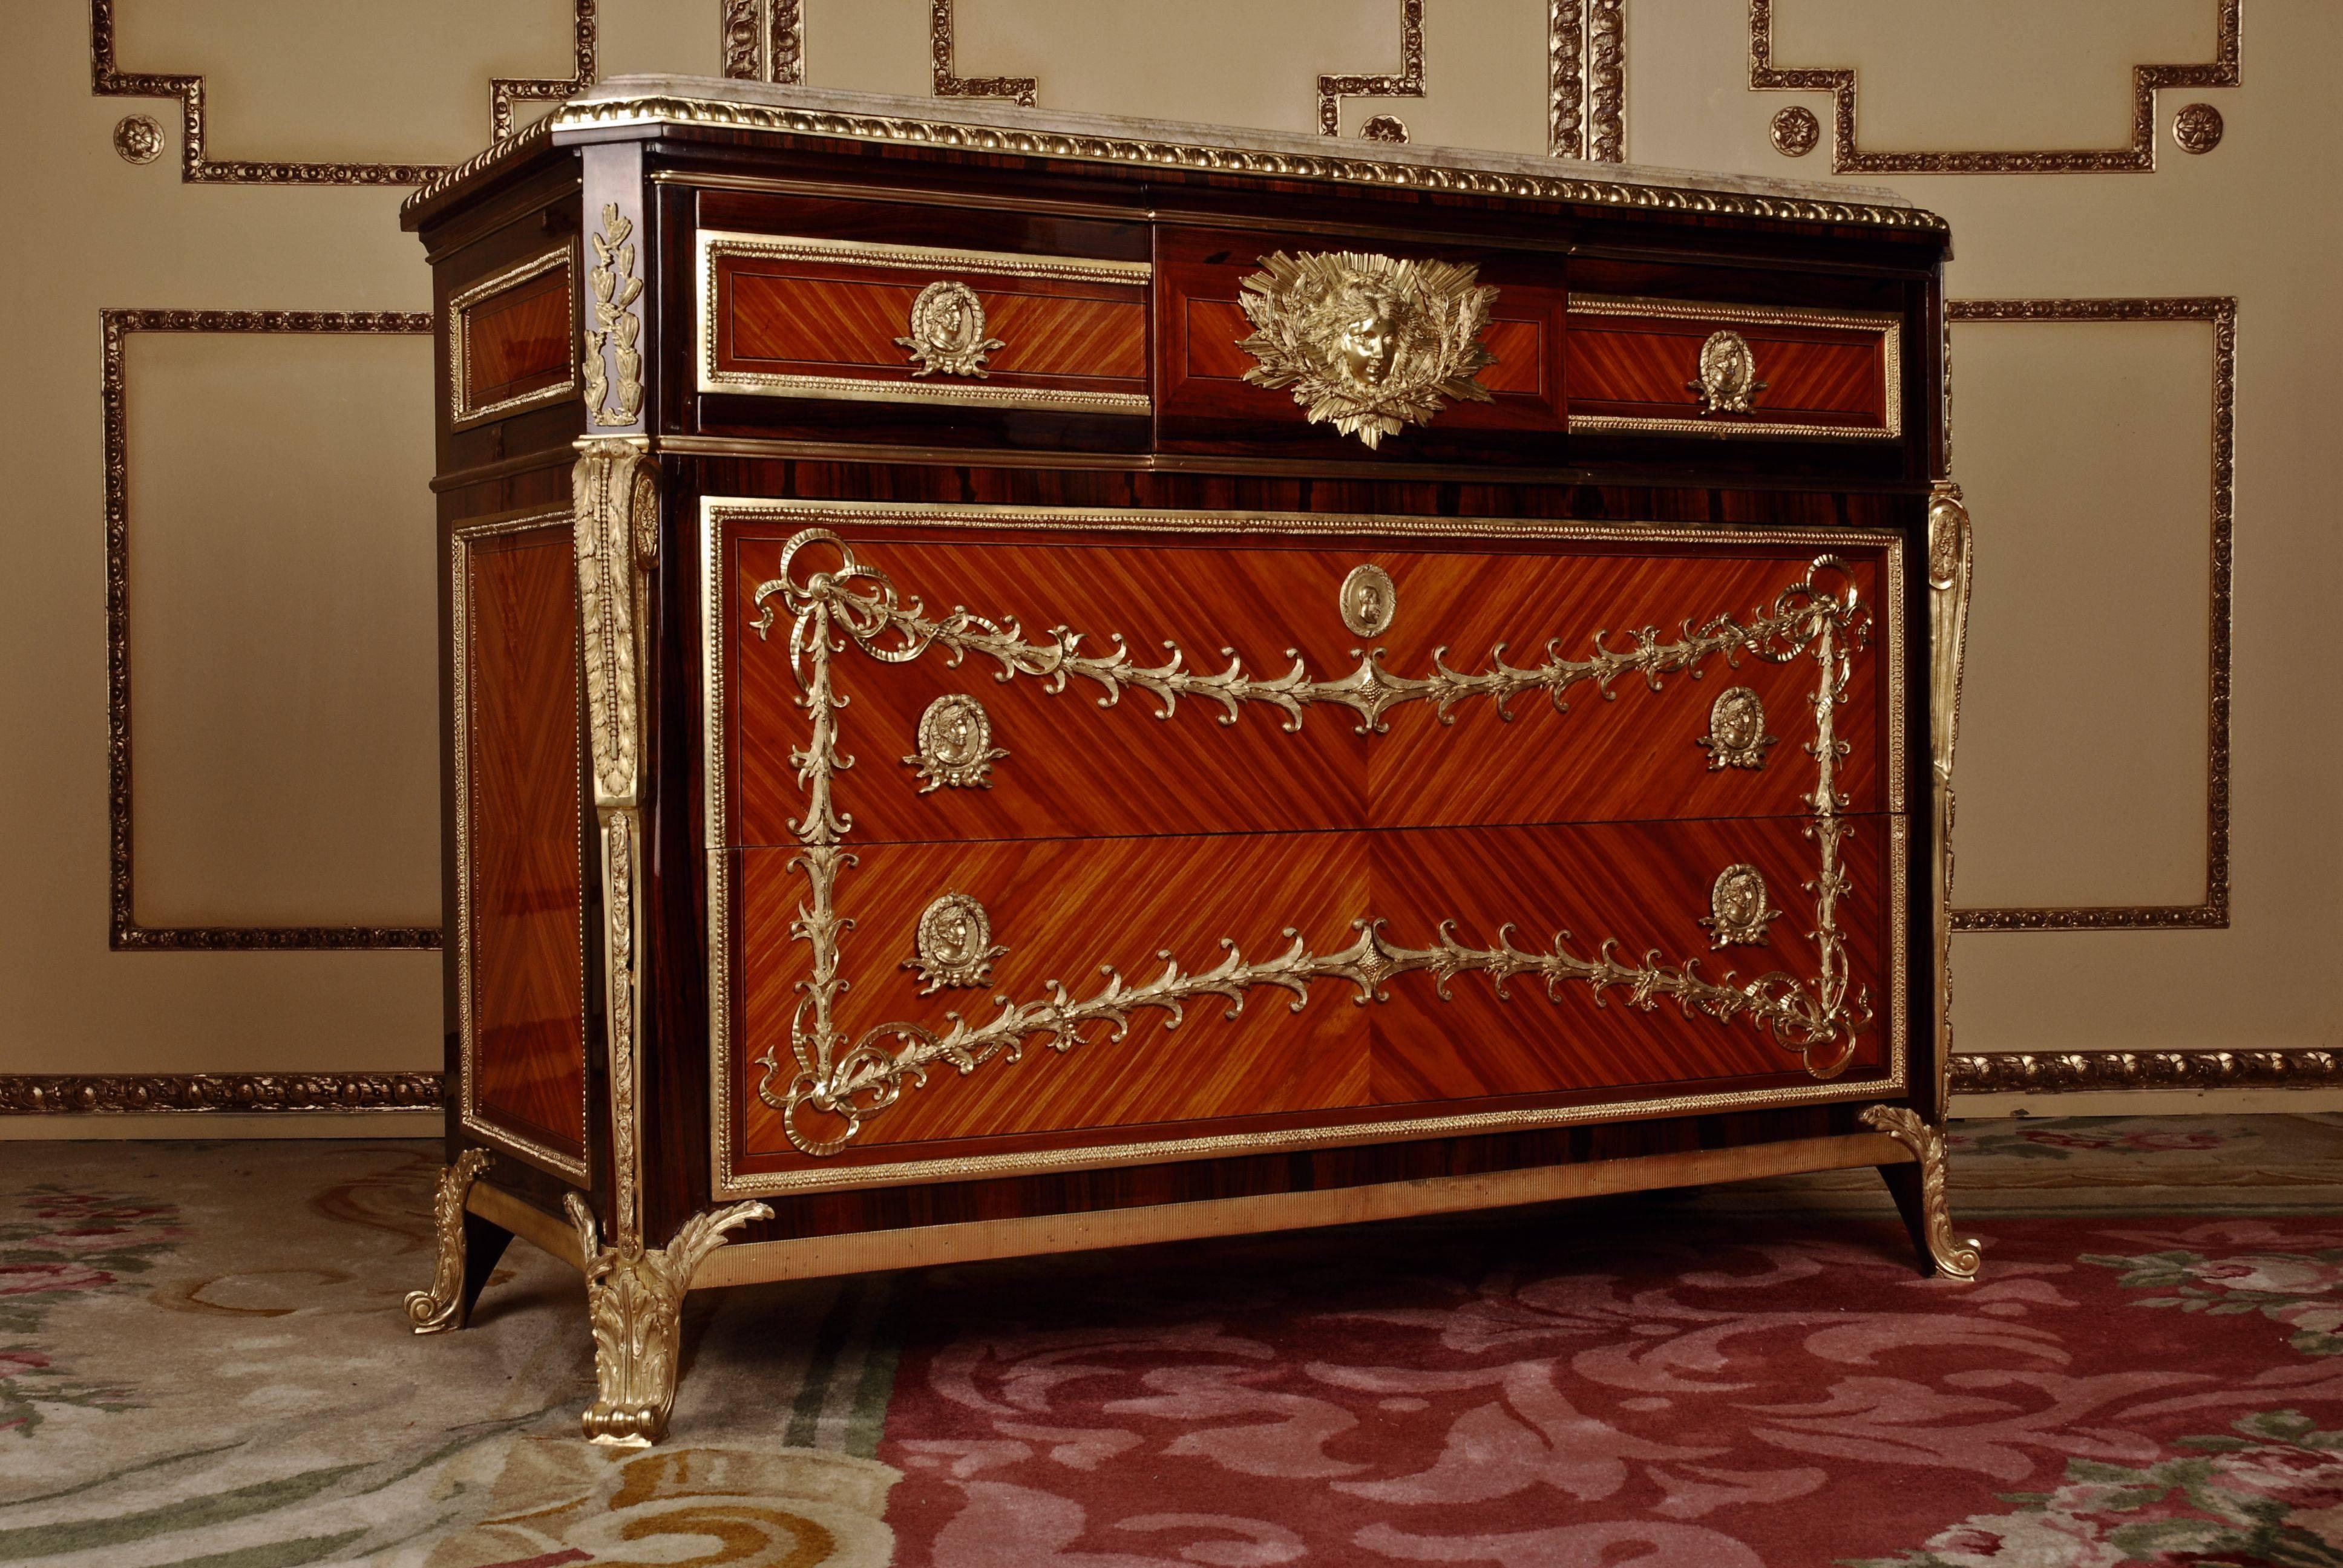 Commode after the original model from Jean Henri Riesener in transition style.
Lightly modified model after an original by Jean Henri Riesener
(1734–1806). solid pine.
Rectangular corpus on bronze caps ending feet. The middle drawer is engraved